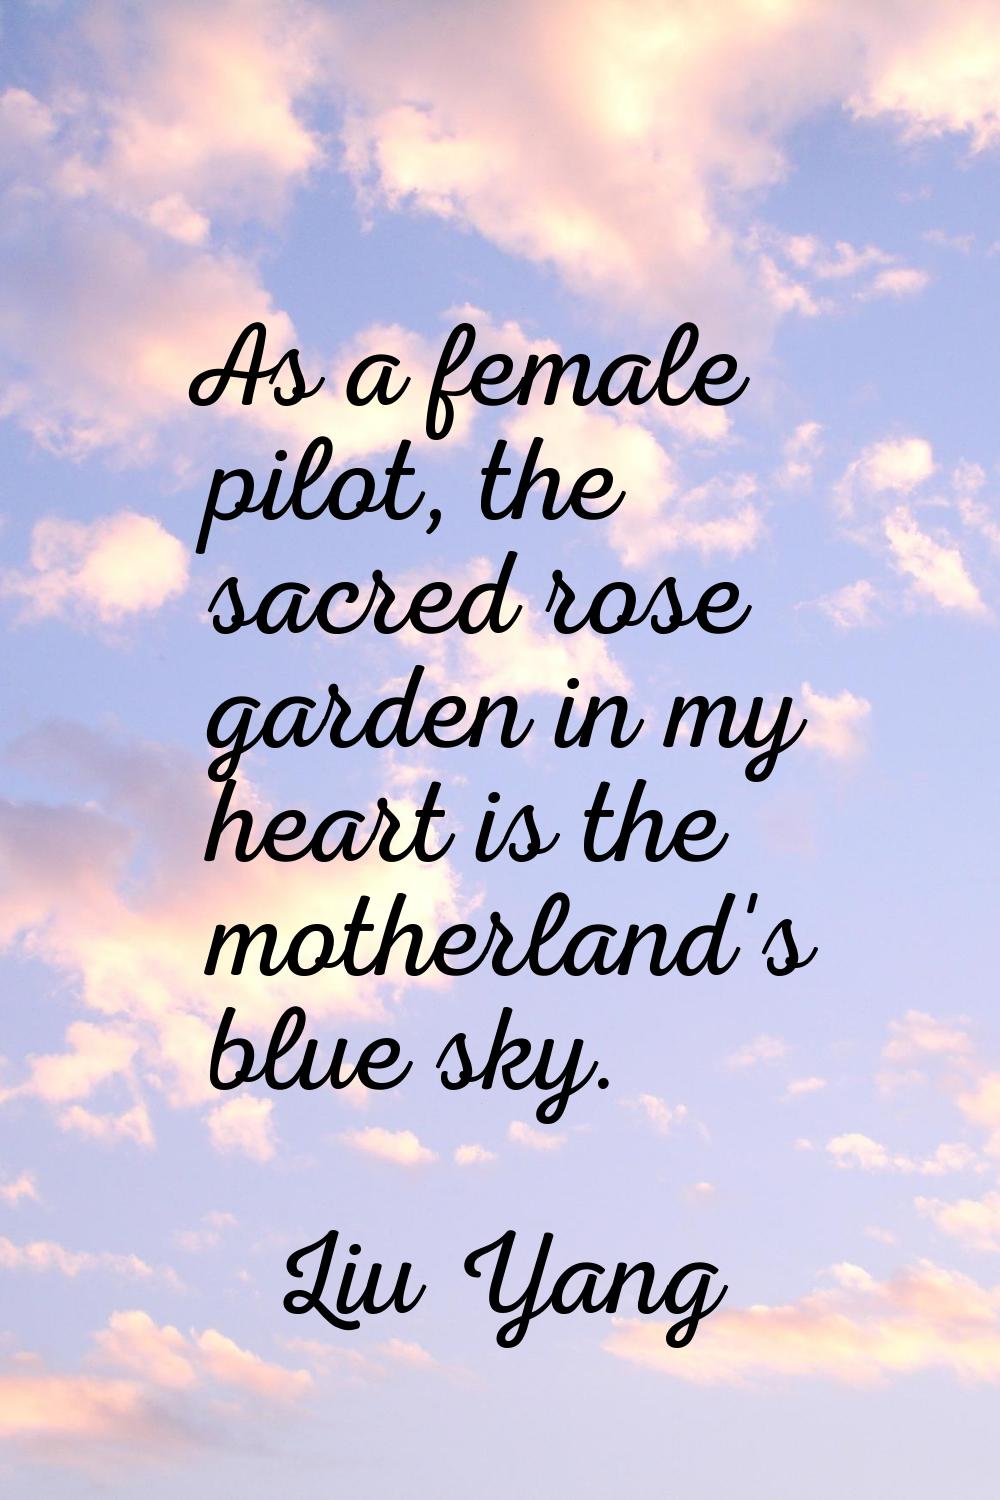 As a female pilot, the sacred rose garden in my heart is the motherland's blue sky.